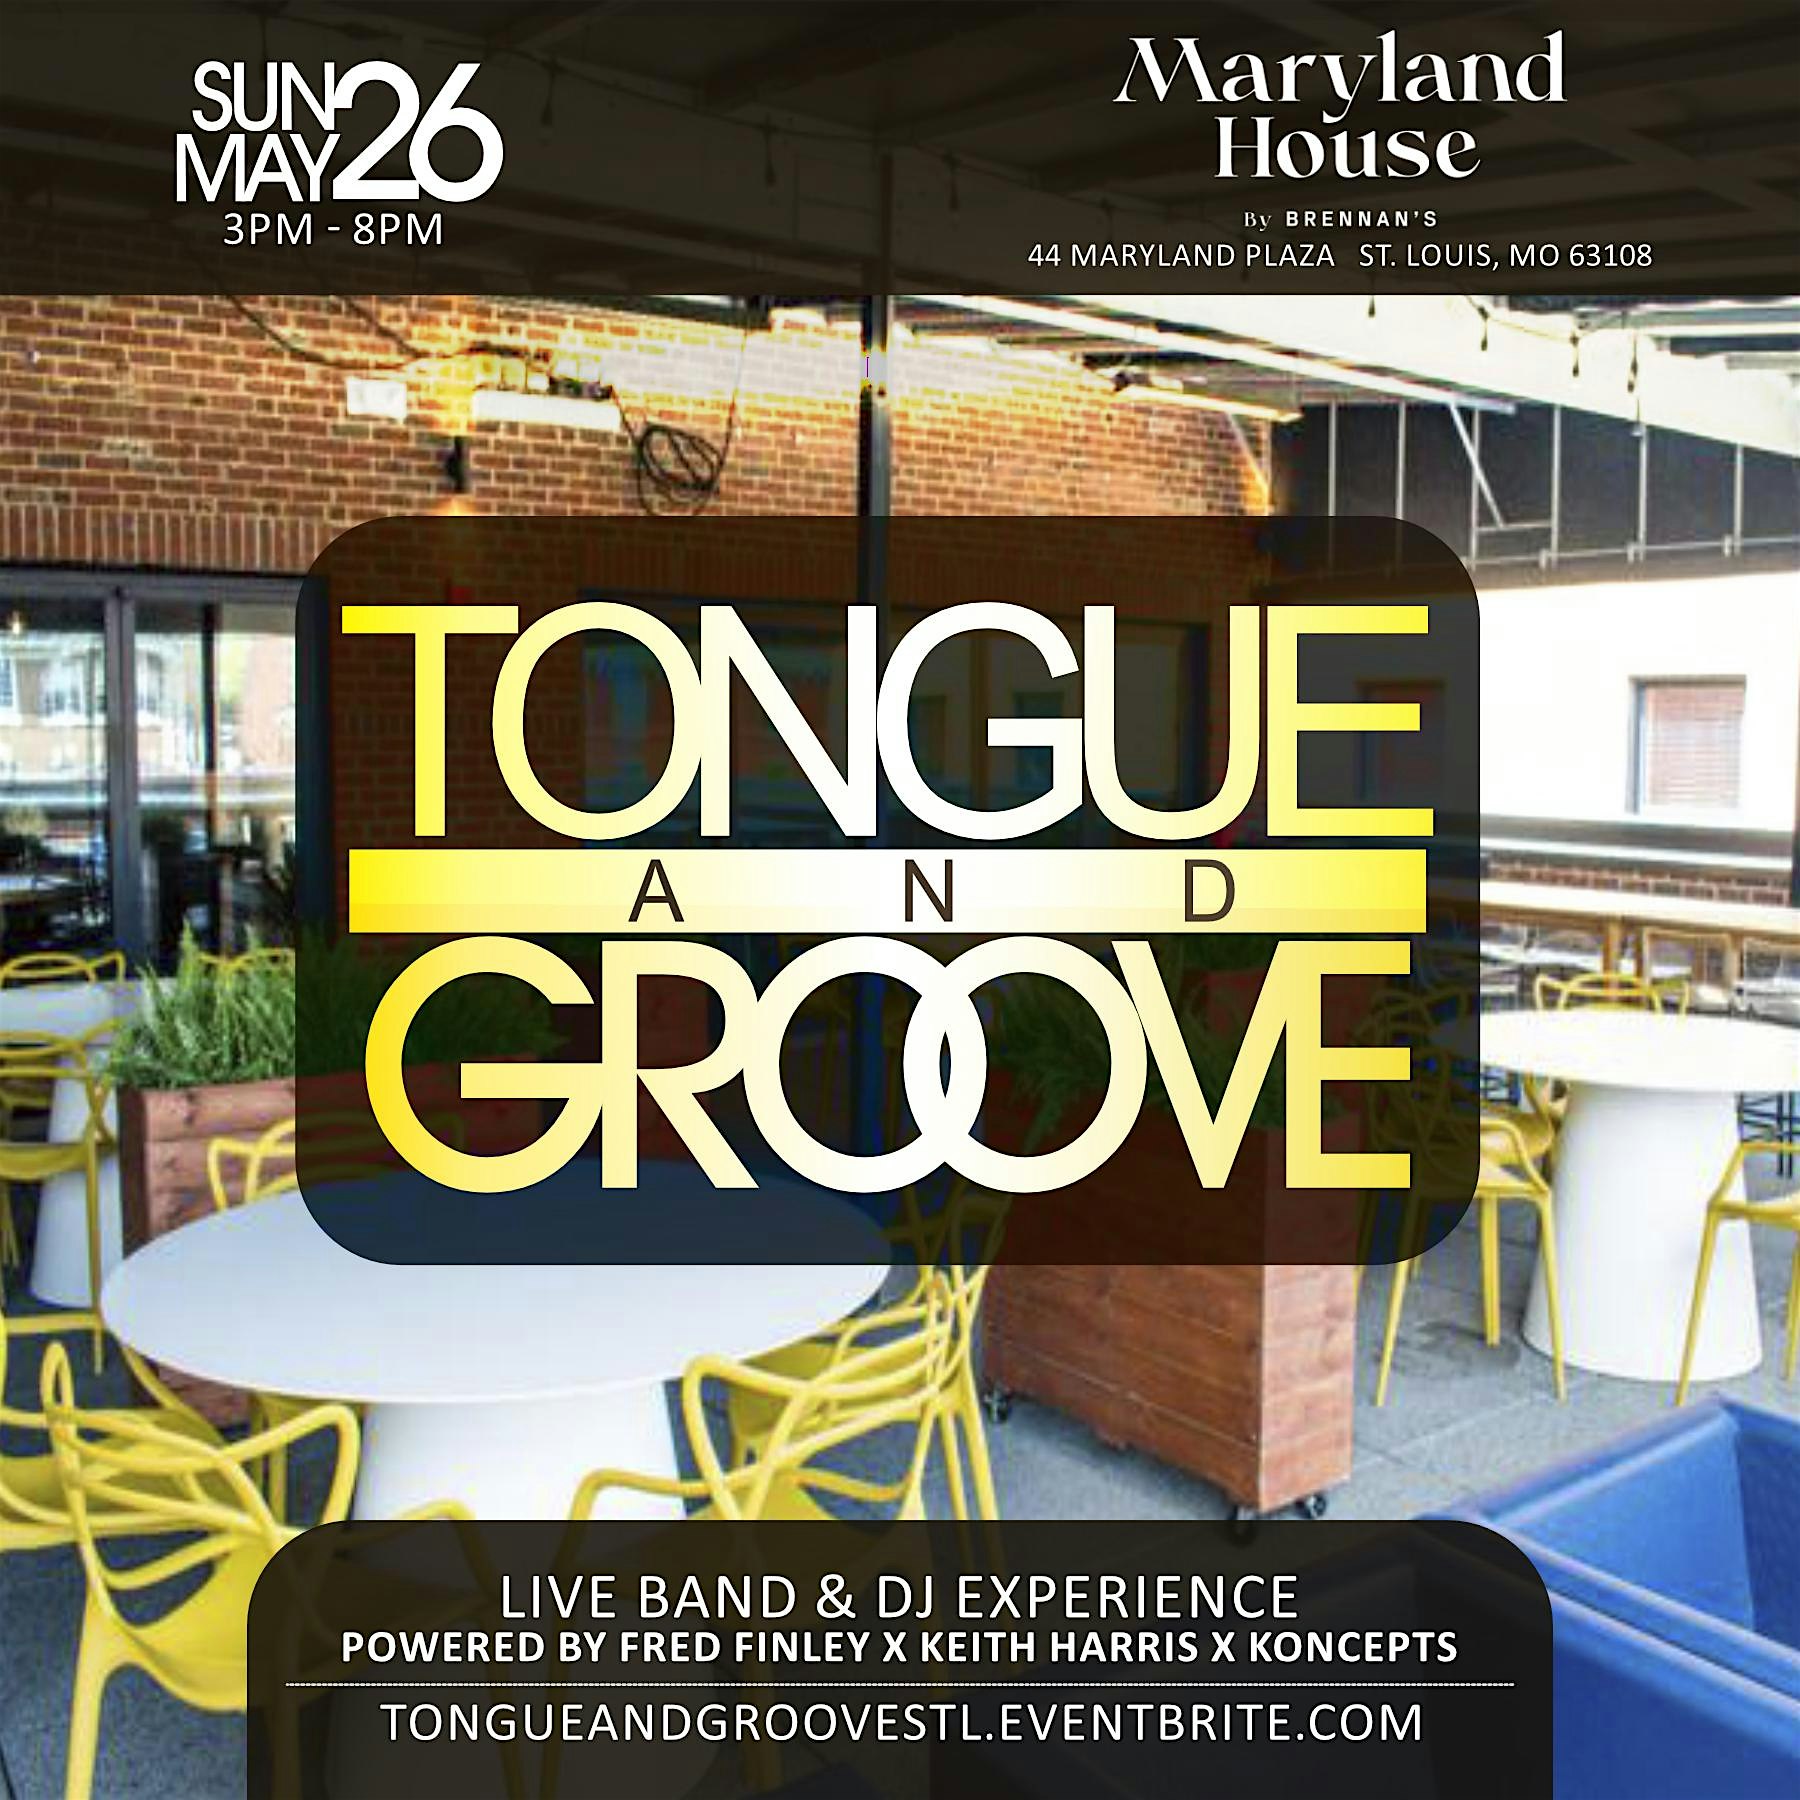 Tongue & Groove | The Maryland House